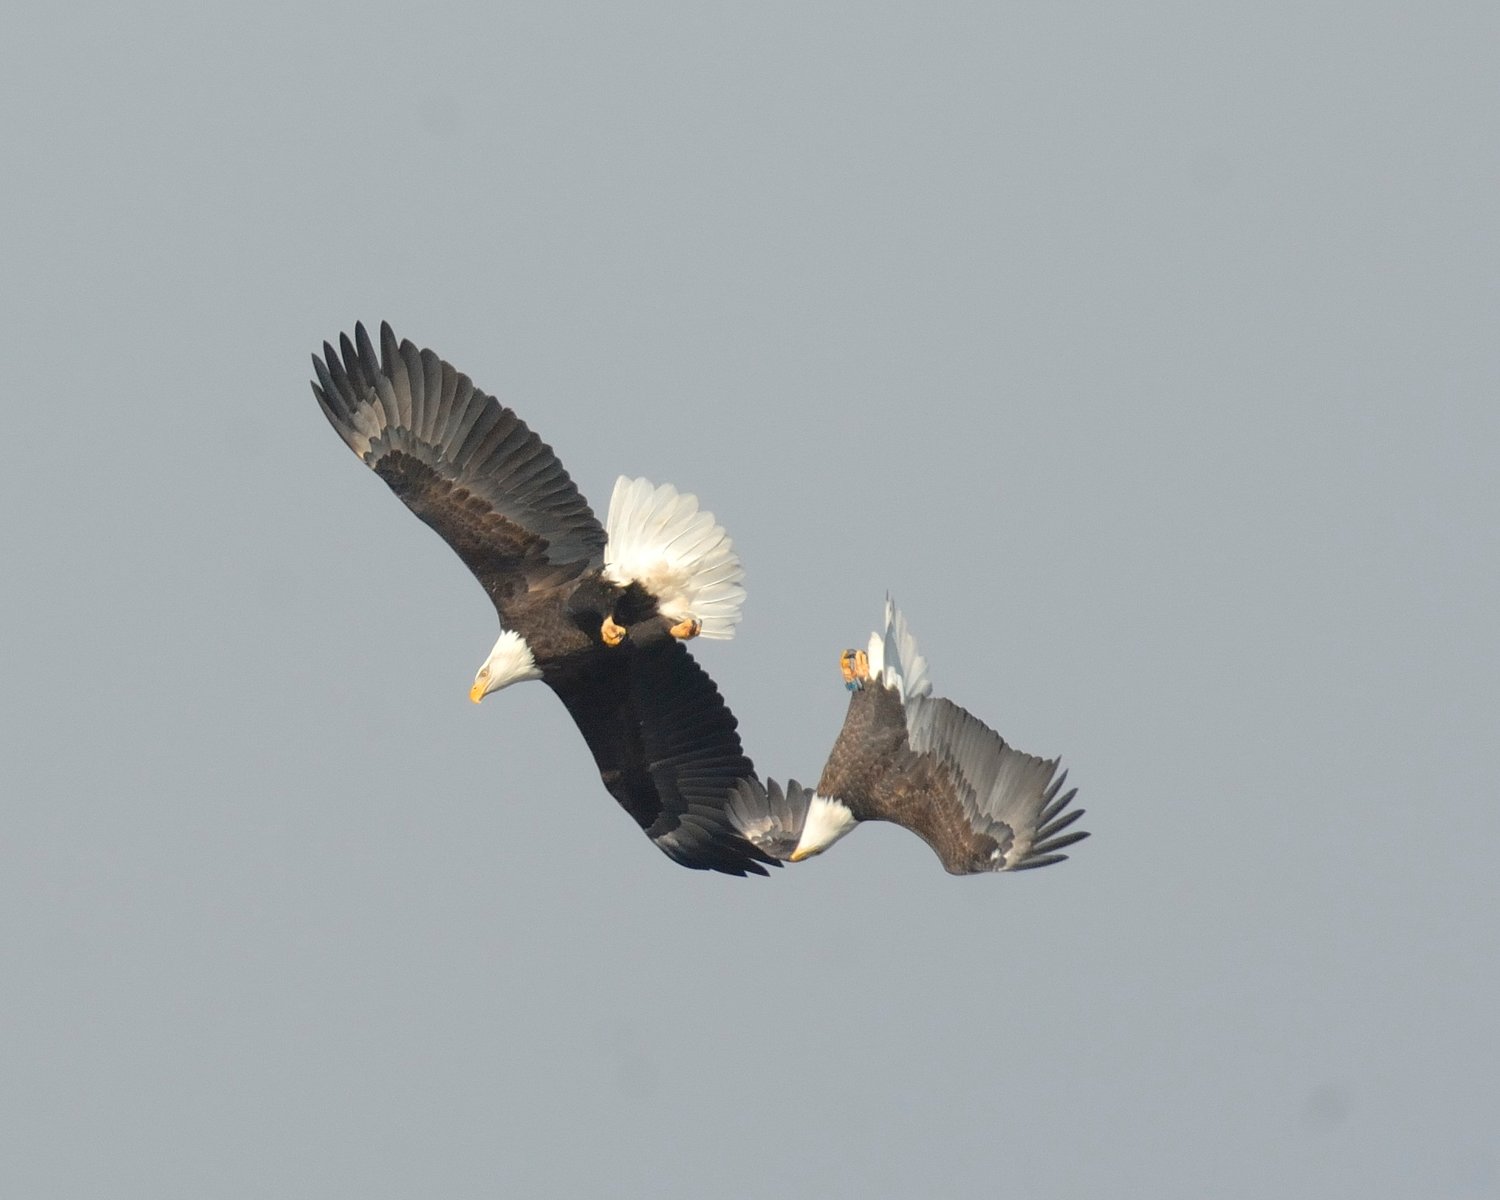 These 2 eagles are likely a mated pair that were flying a courtship ritual. This pair rolled close to each other but did not lock talons and spiral down, and unlocking at the last moment hitting the ground. Contrary to popular belief, eagles do not mate in the air during this ritual; they mate as most birds do, while perched.